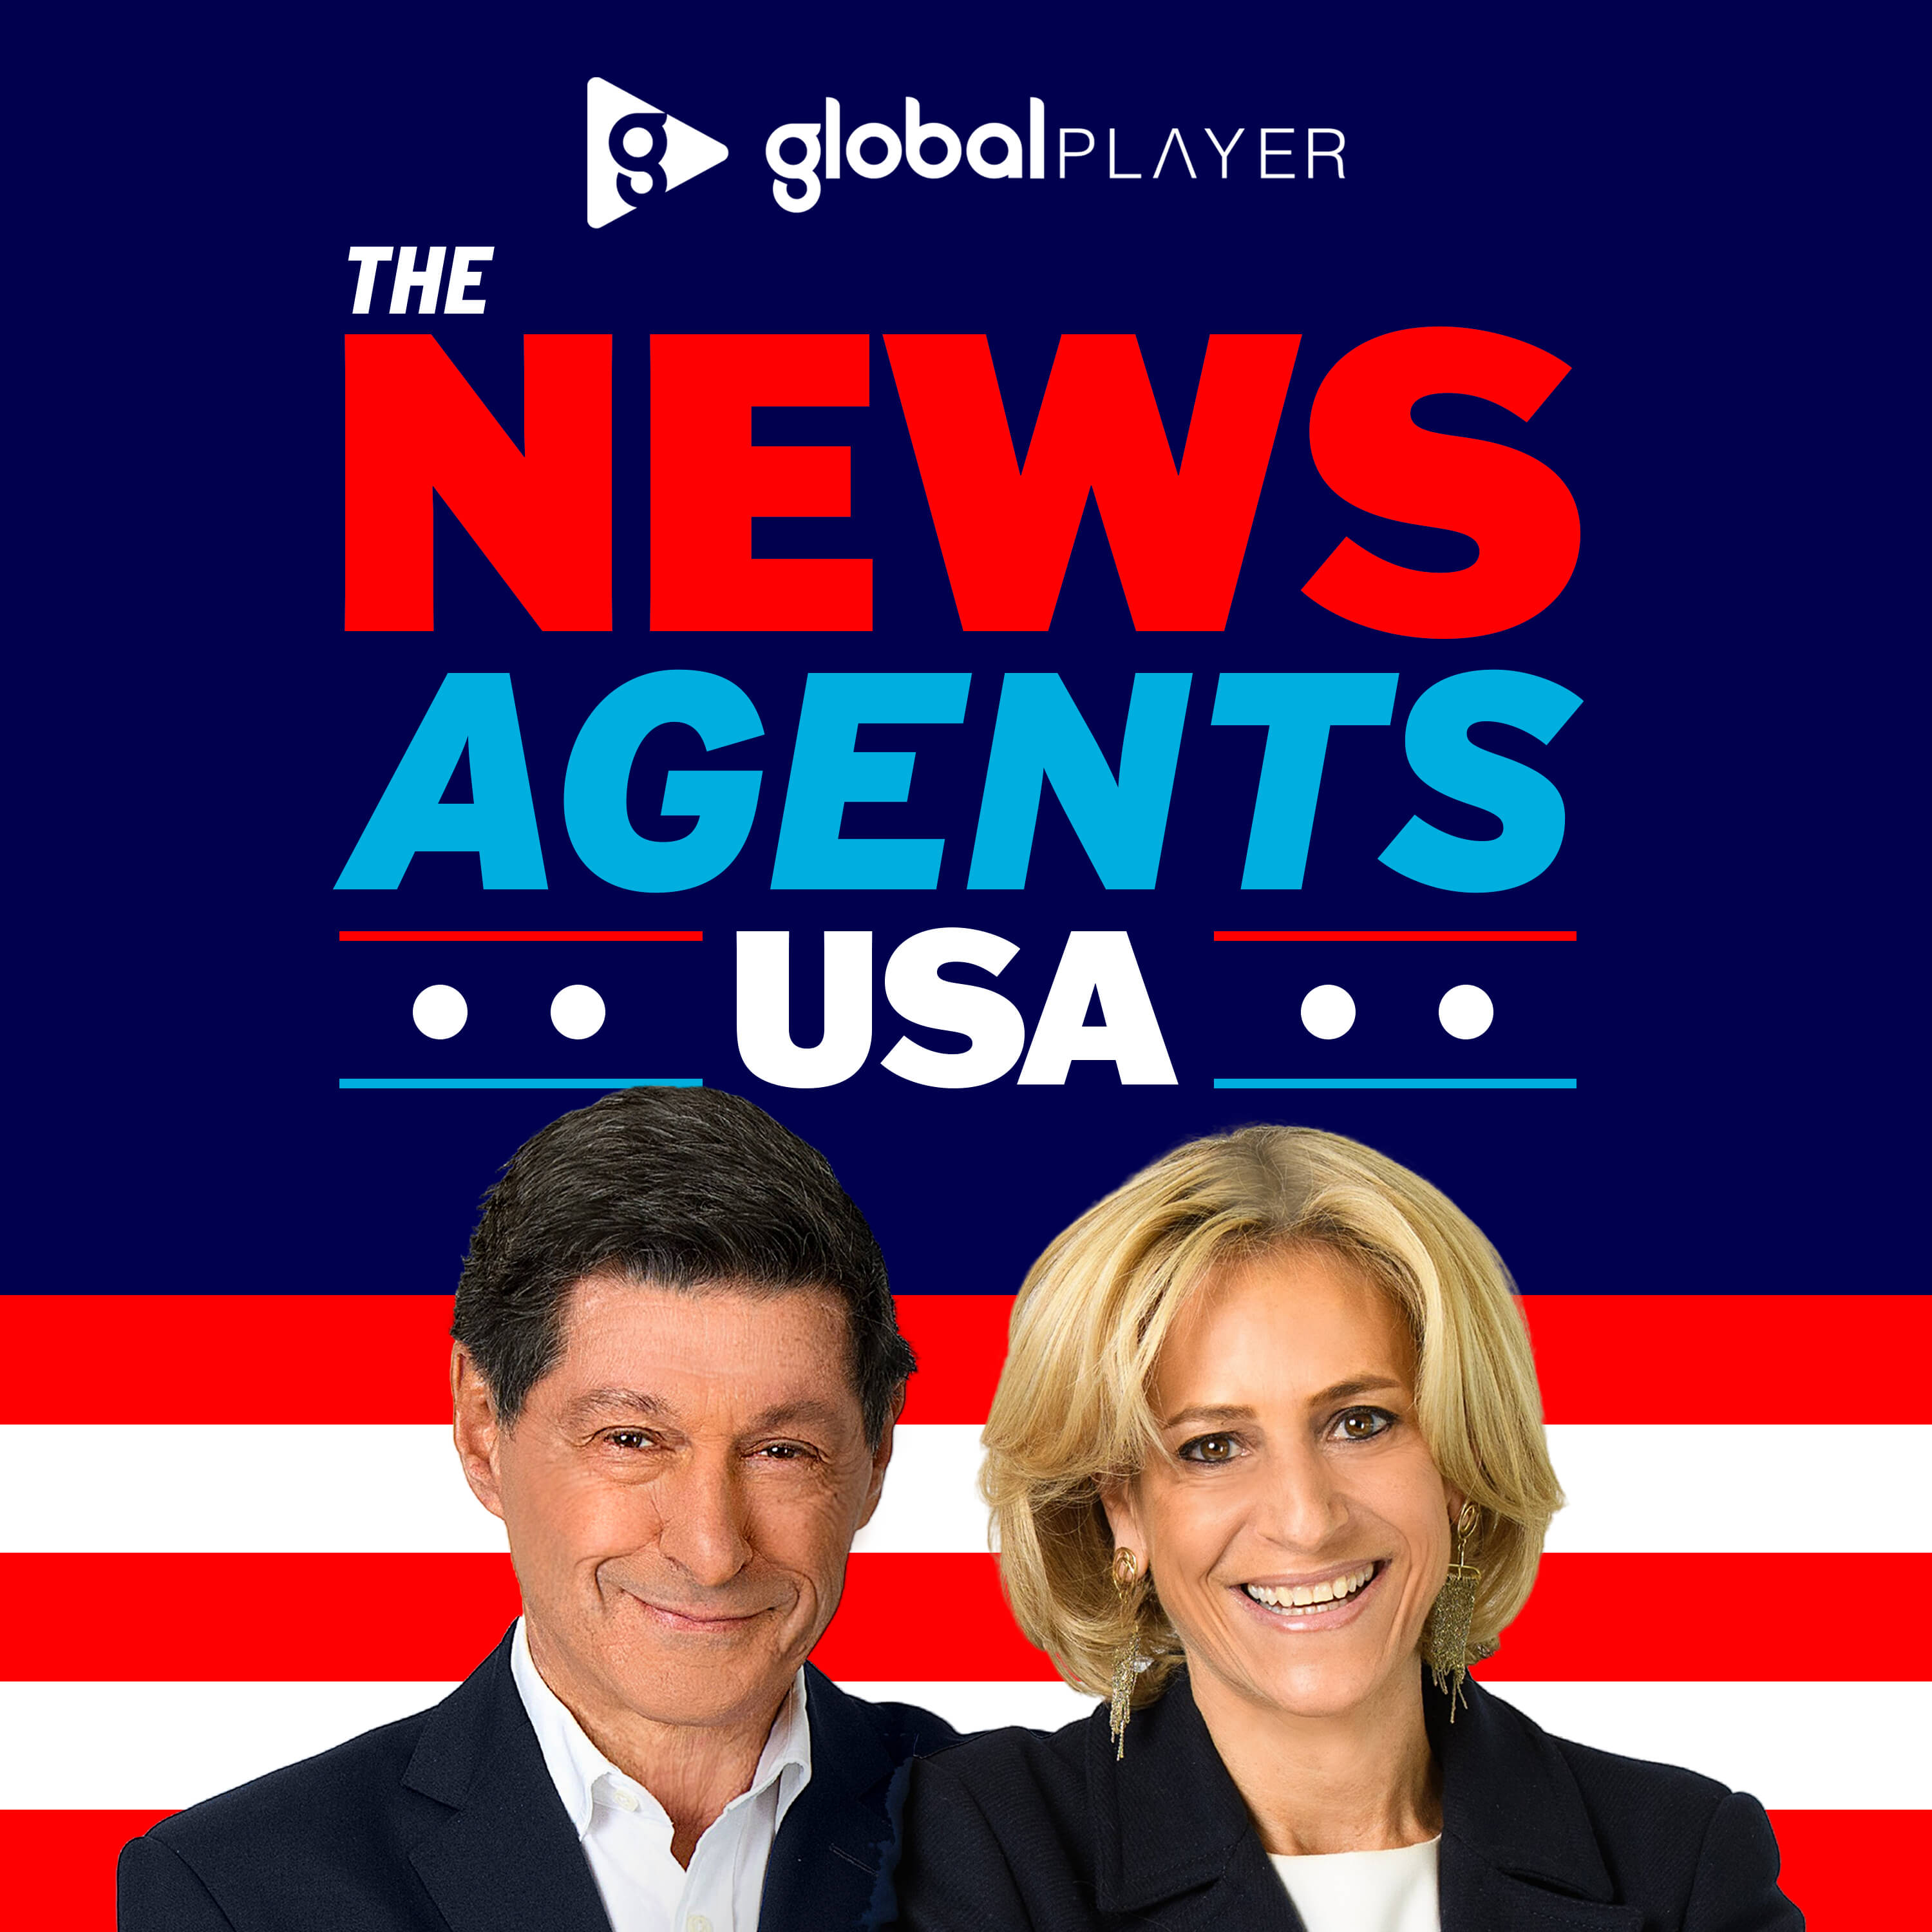 Artwork for The News Agents - USA